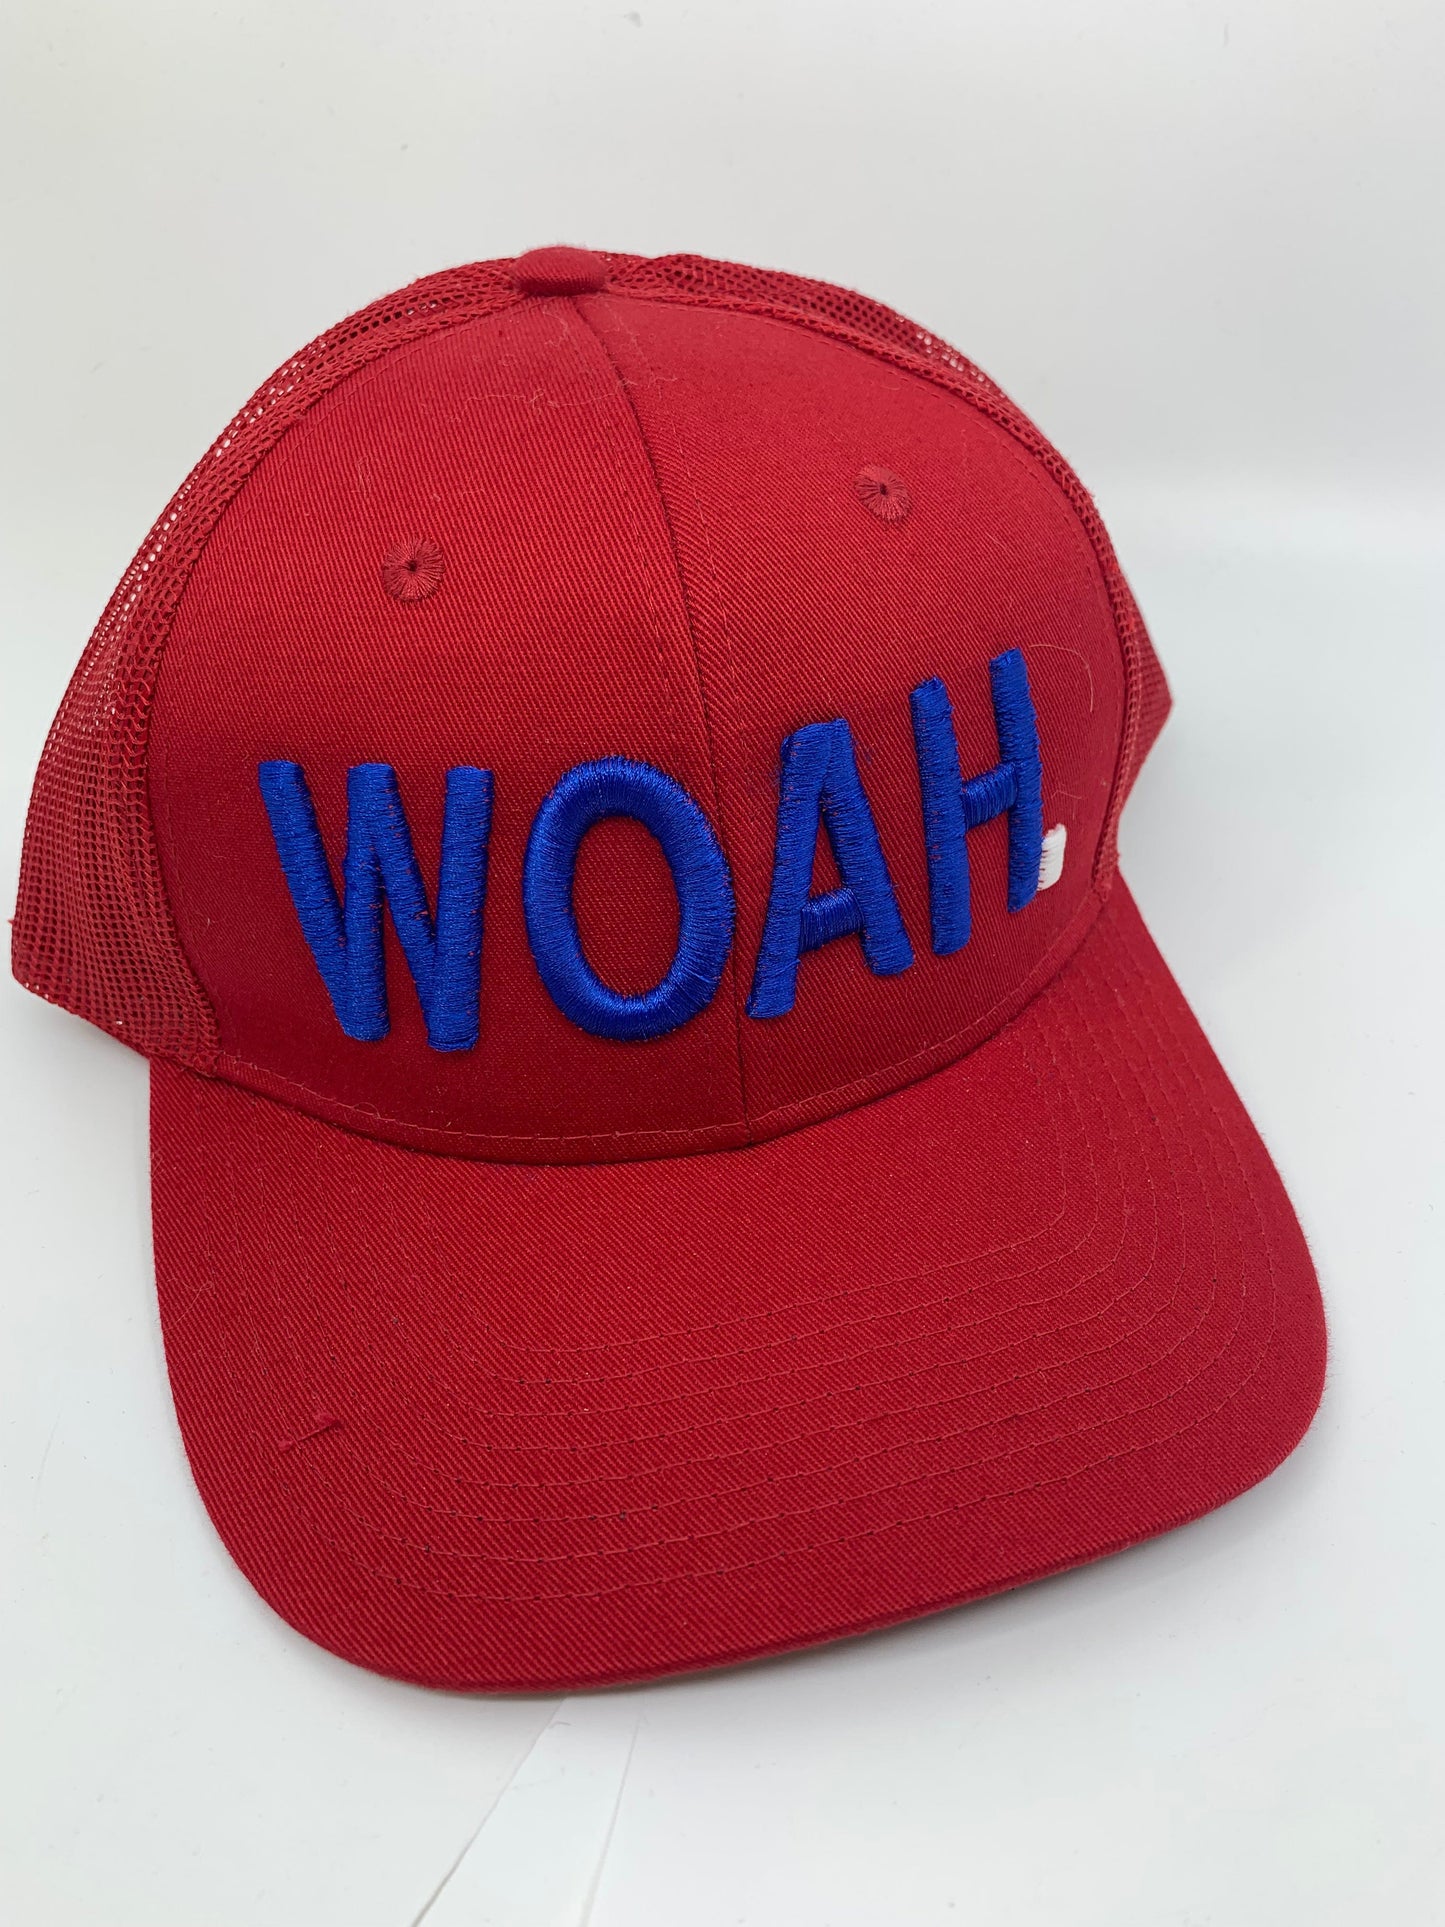 Equestrian Team Apparel Custom Team Hats Red/Blue/White Trucker Cap-WOAH. equestrian team apparel online tack store mobile tack store custom farm apparel custom show stable clothing equestrian lifestyle horse show clothing riding clothes horses equestrian tack store